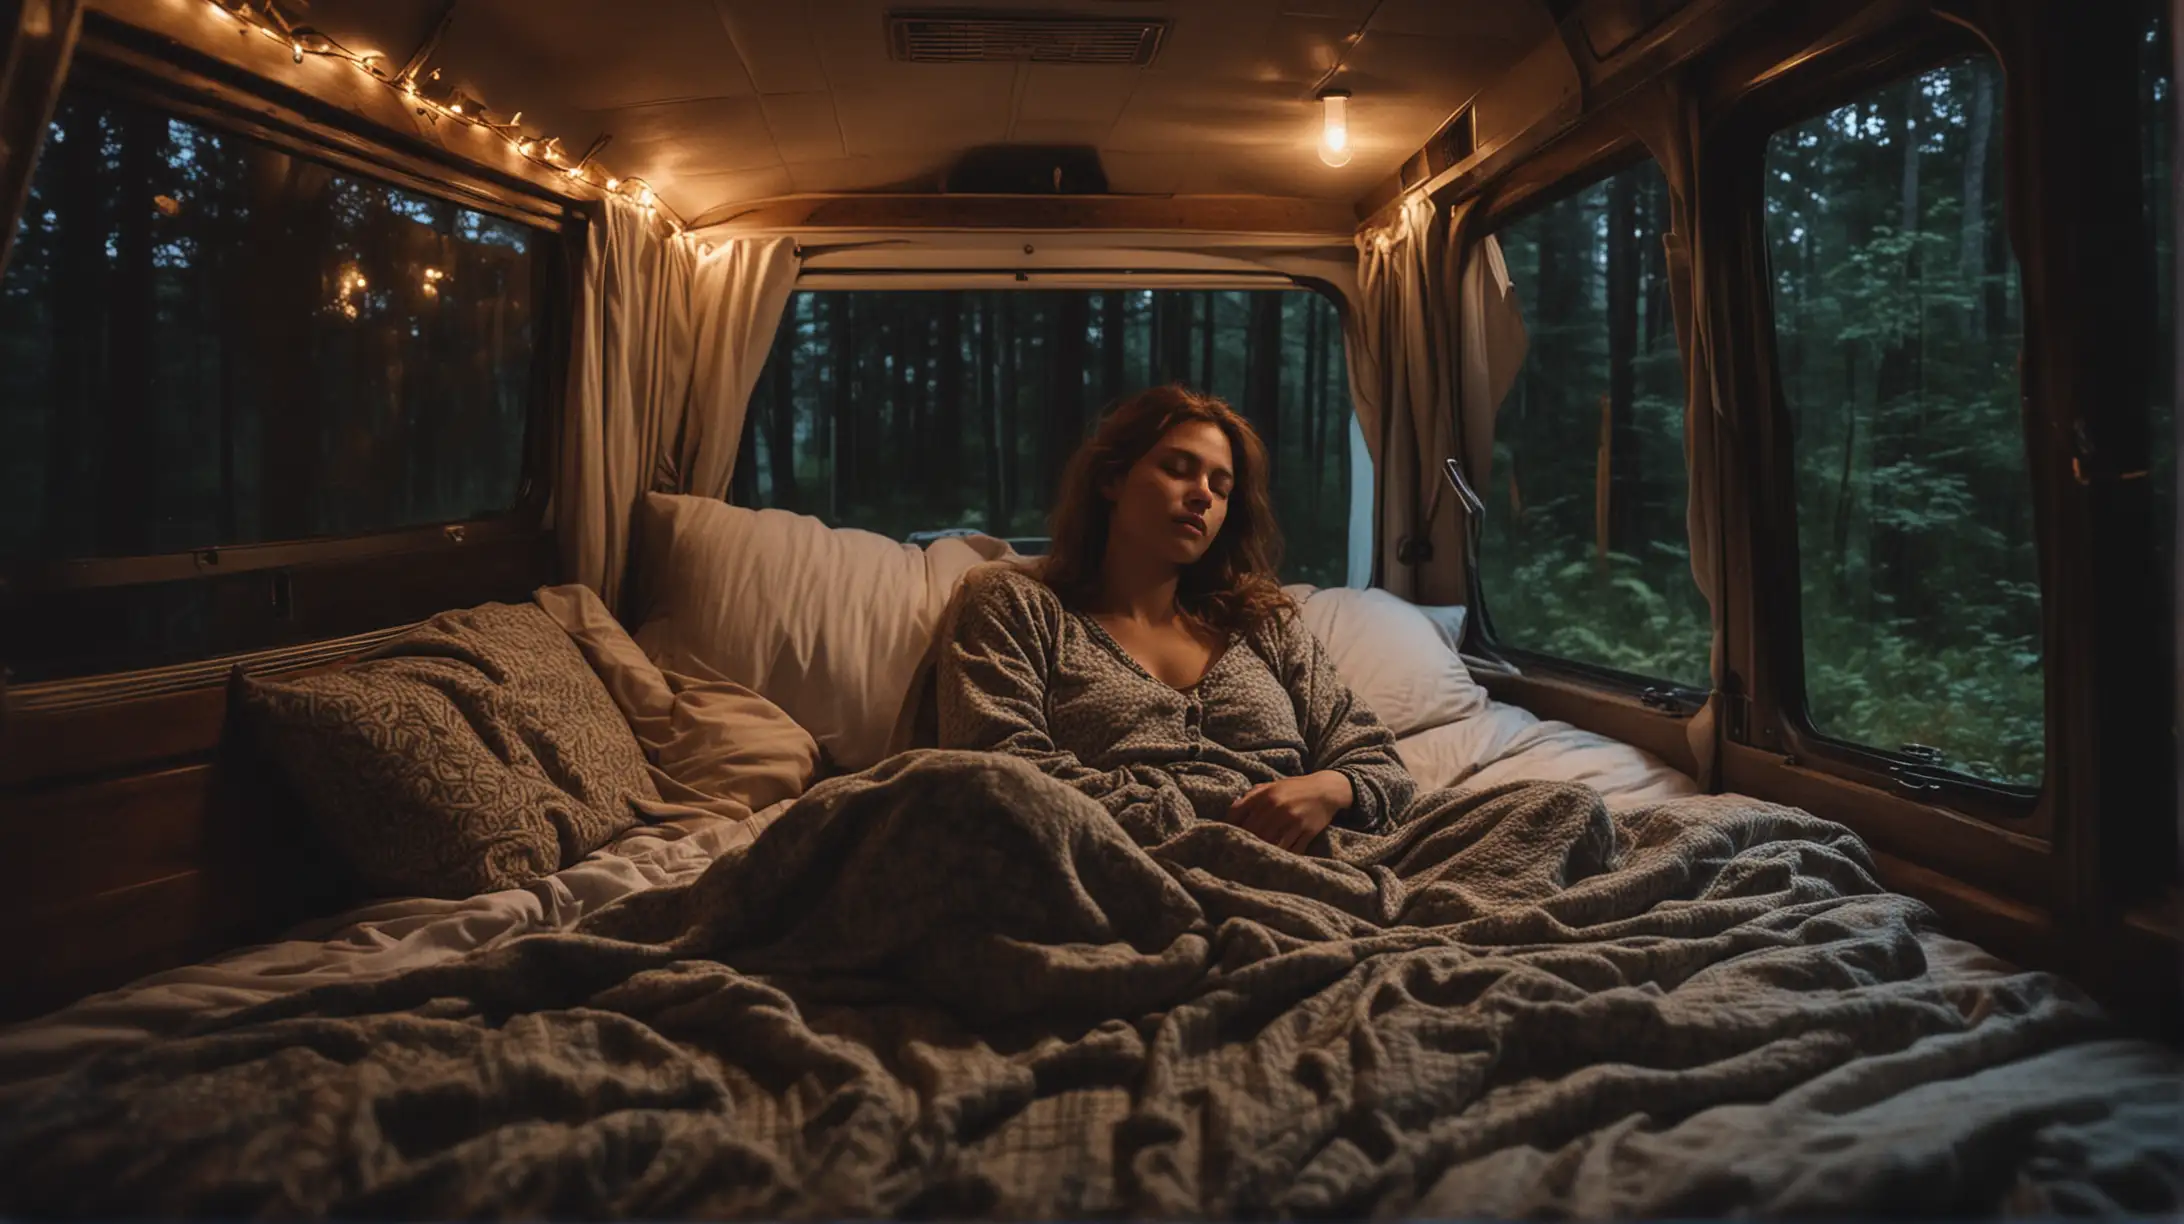 Create an evocative image of a woman peacefully asleep in a camper van at night. The scene is dark, illuminated only by the soft glow inside the van. Through the windows, a dense forest is visible, hinting at the tranquility of the surroundings. The woman lies on top of a cozy blanket, her head resting on a pillow, wearing comfortable pajamas. Capture the serenity and coziness of the moment in your artwork